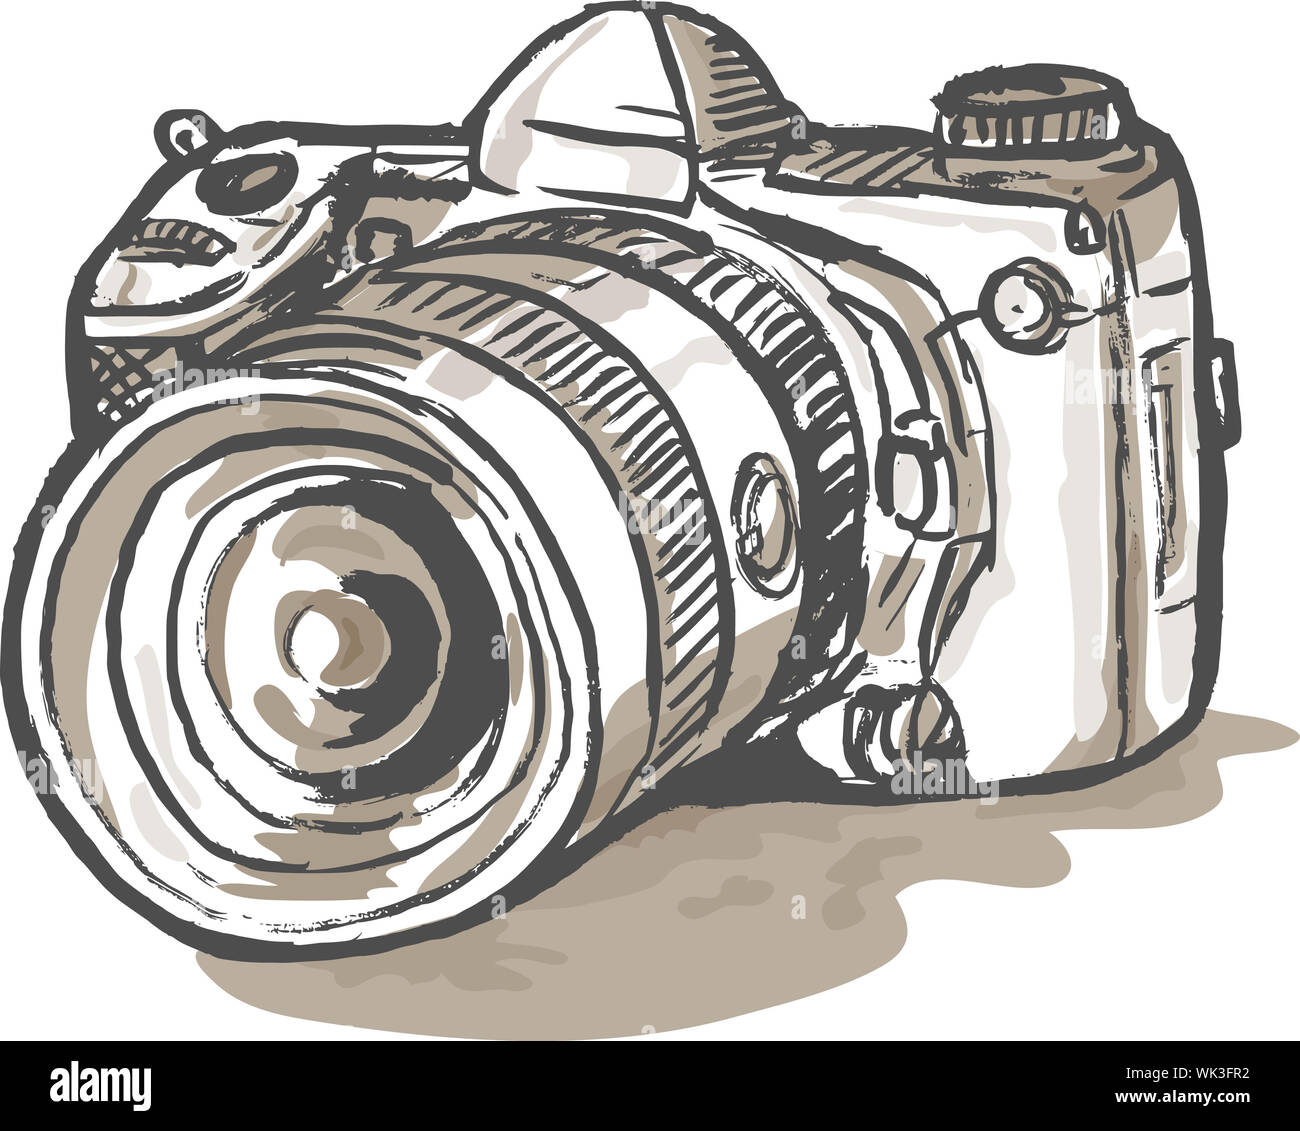 128 Shooting Camera Drawing High Res Illustrations - Getty Images